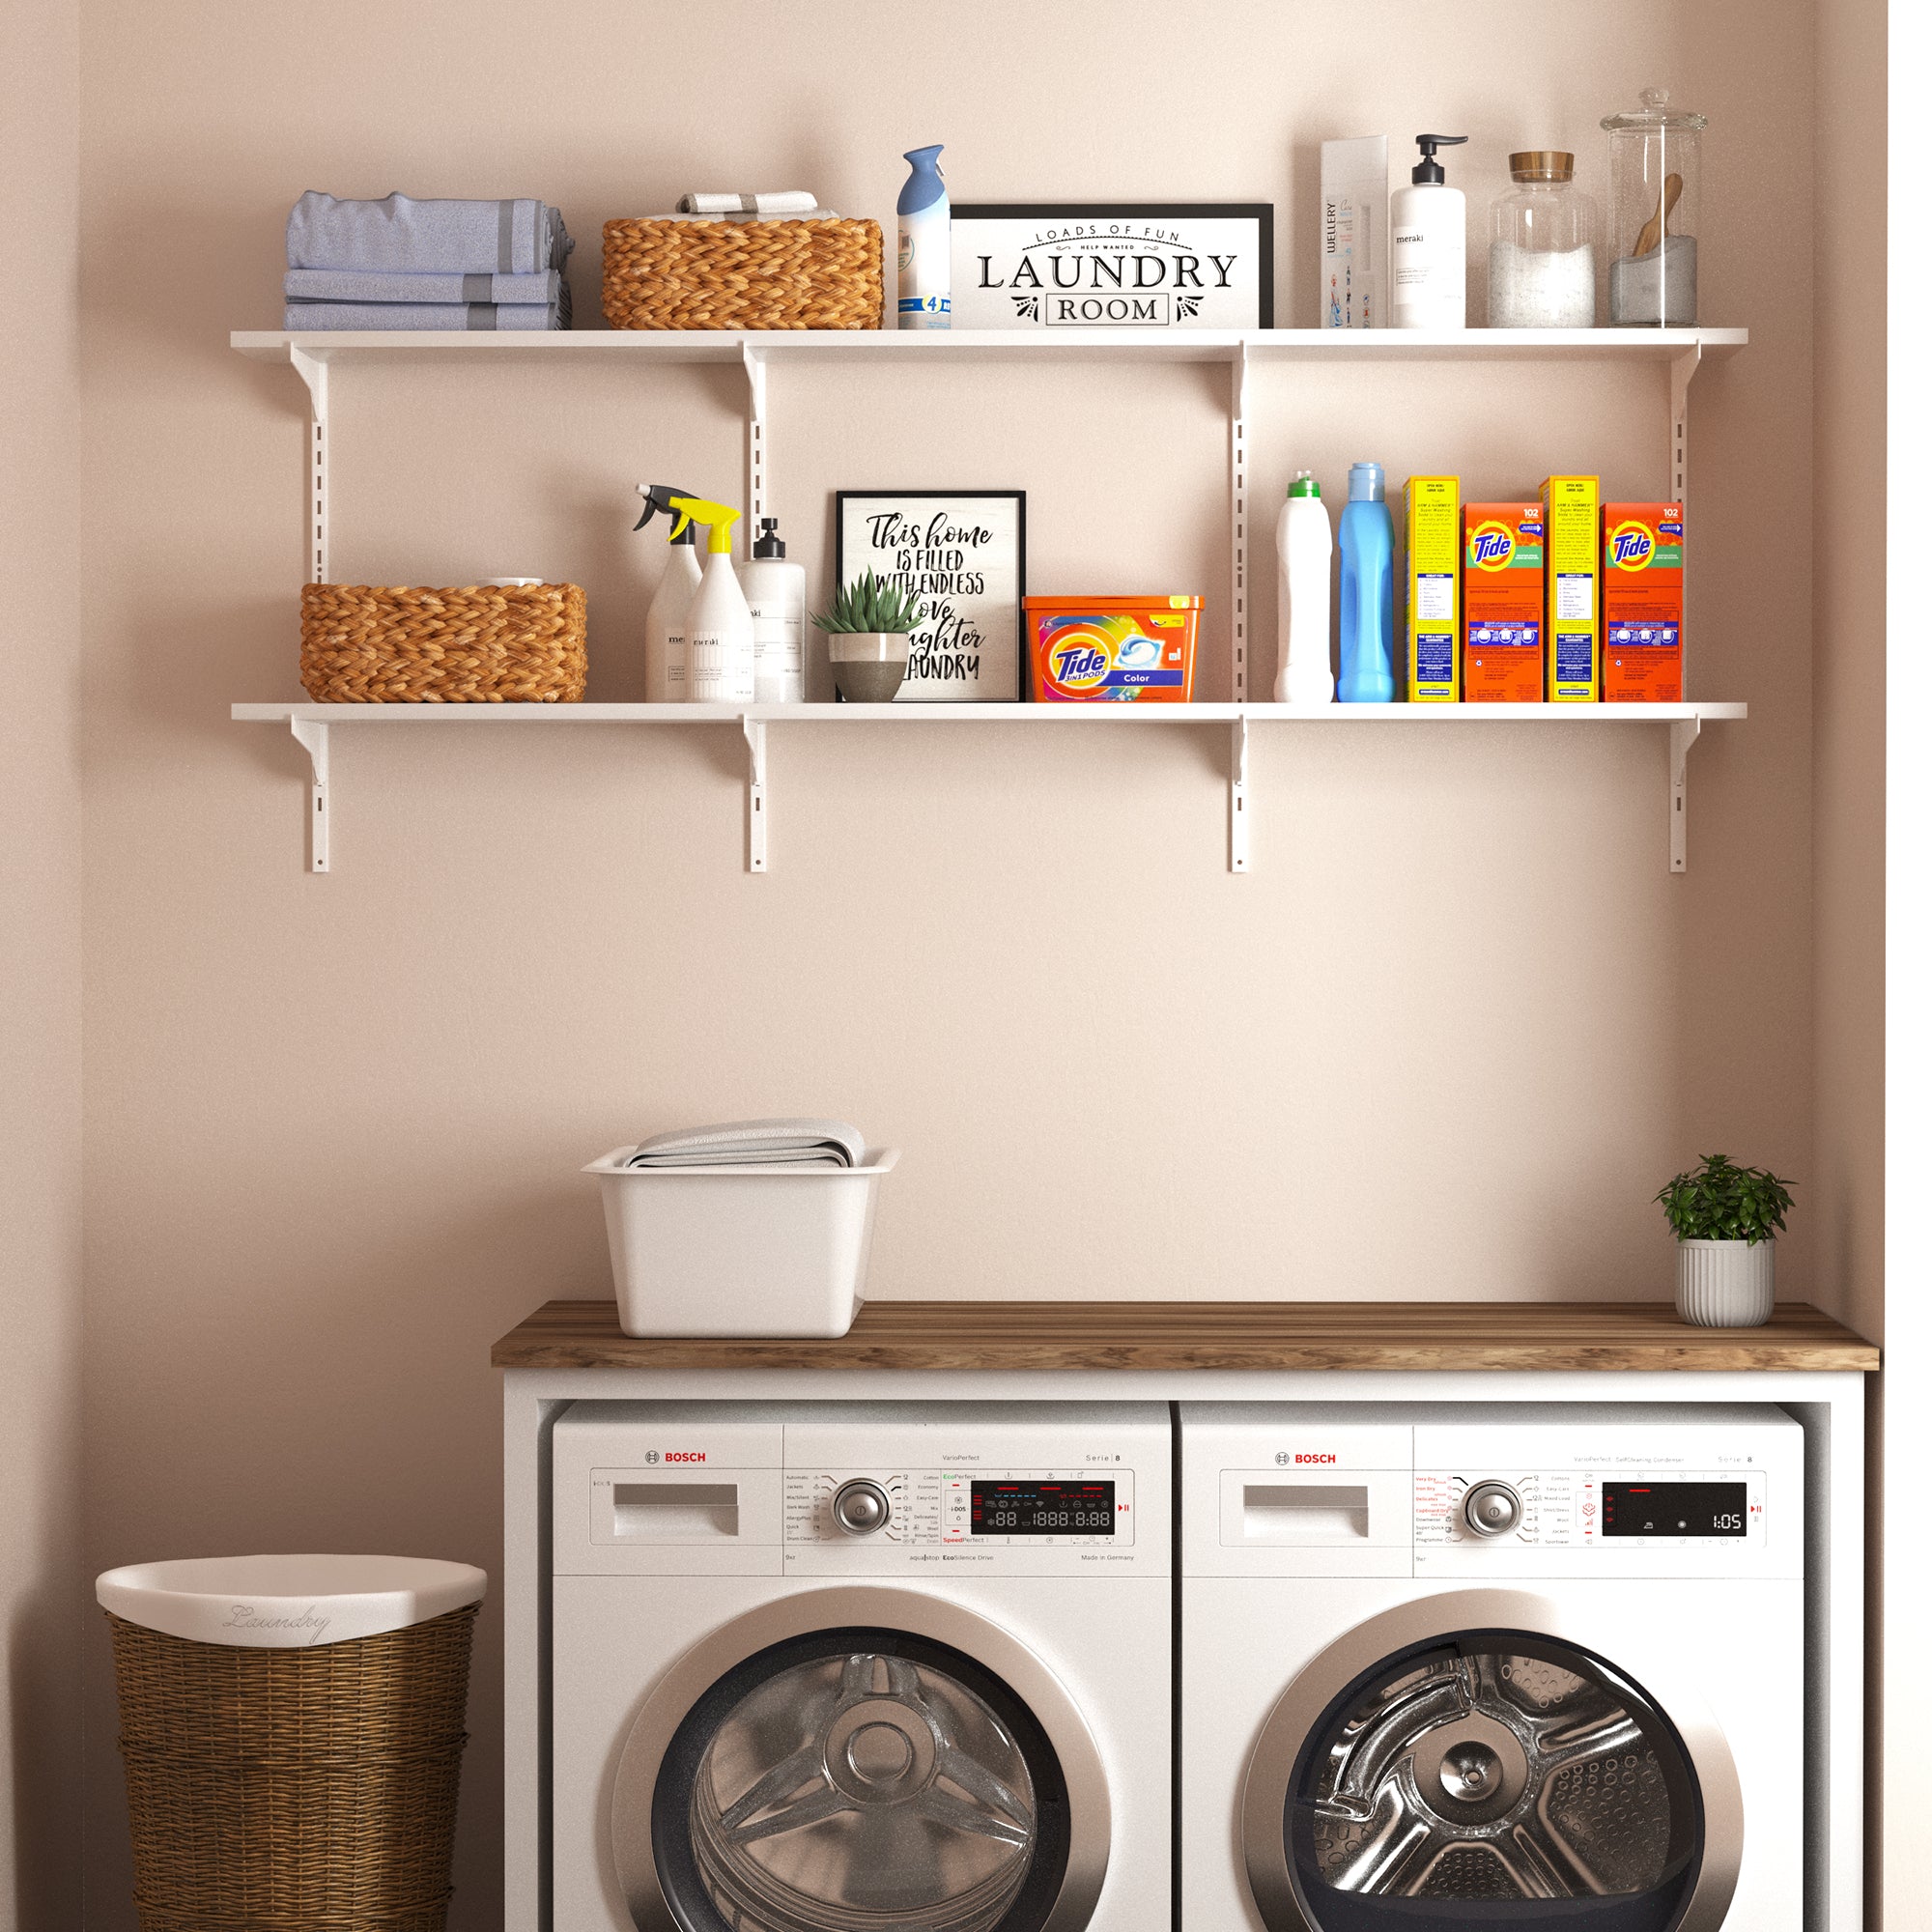 White laundry room shelves neatly stocked with towels, cleaning supplies, and décor accents.